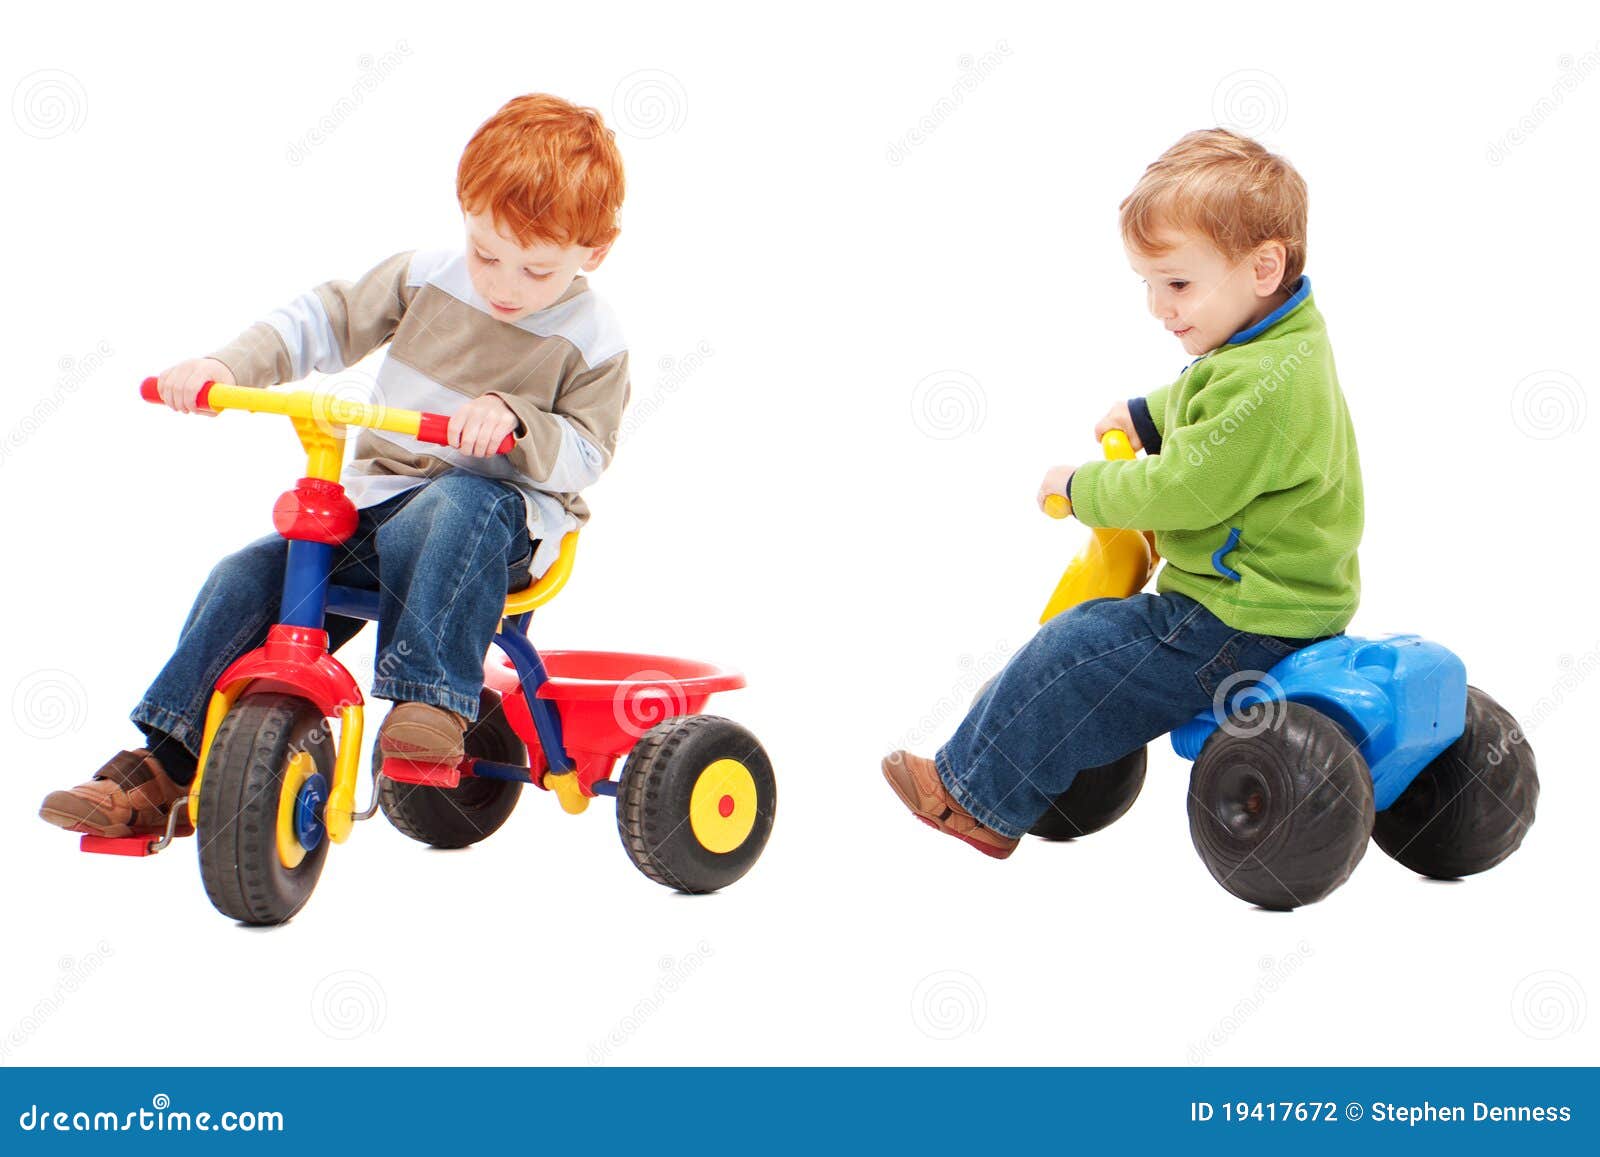 three wheeler for toddlers